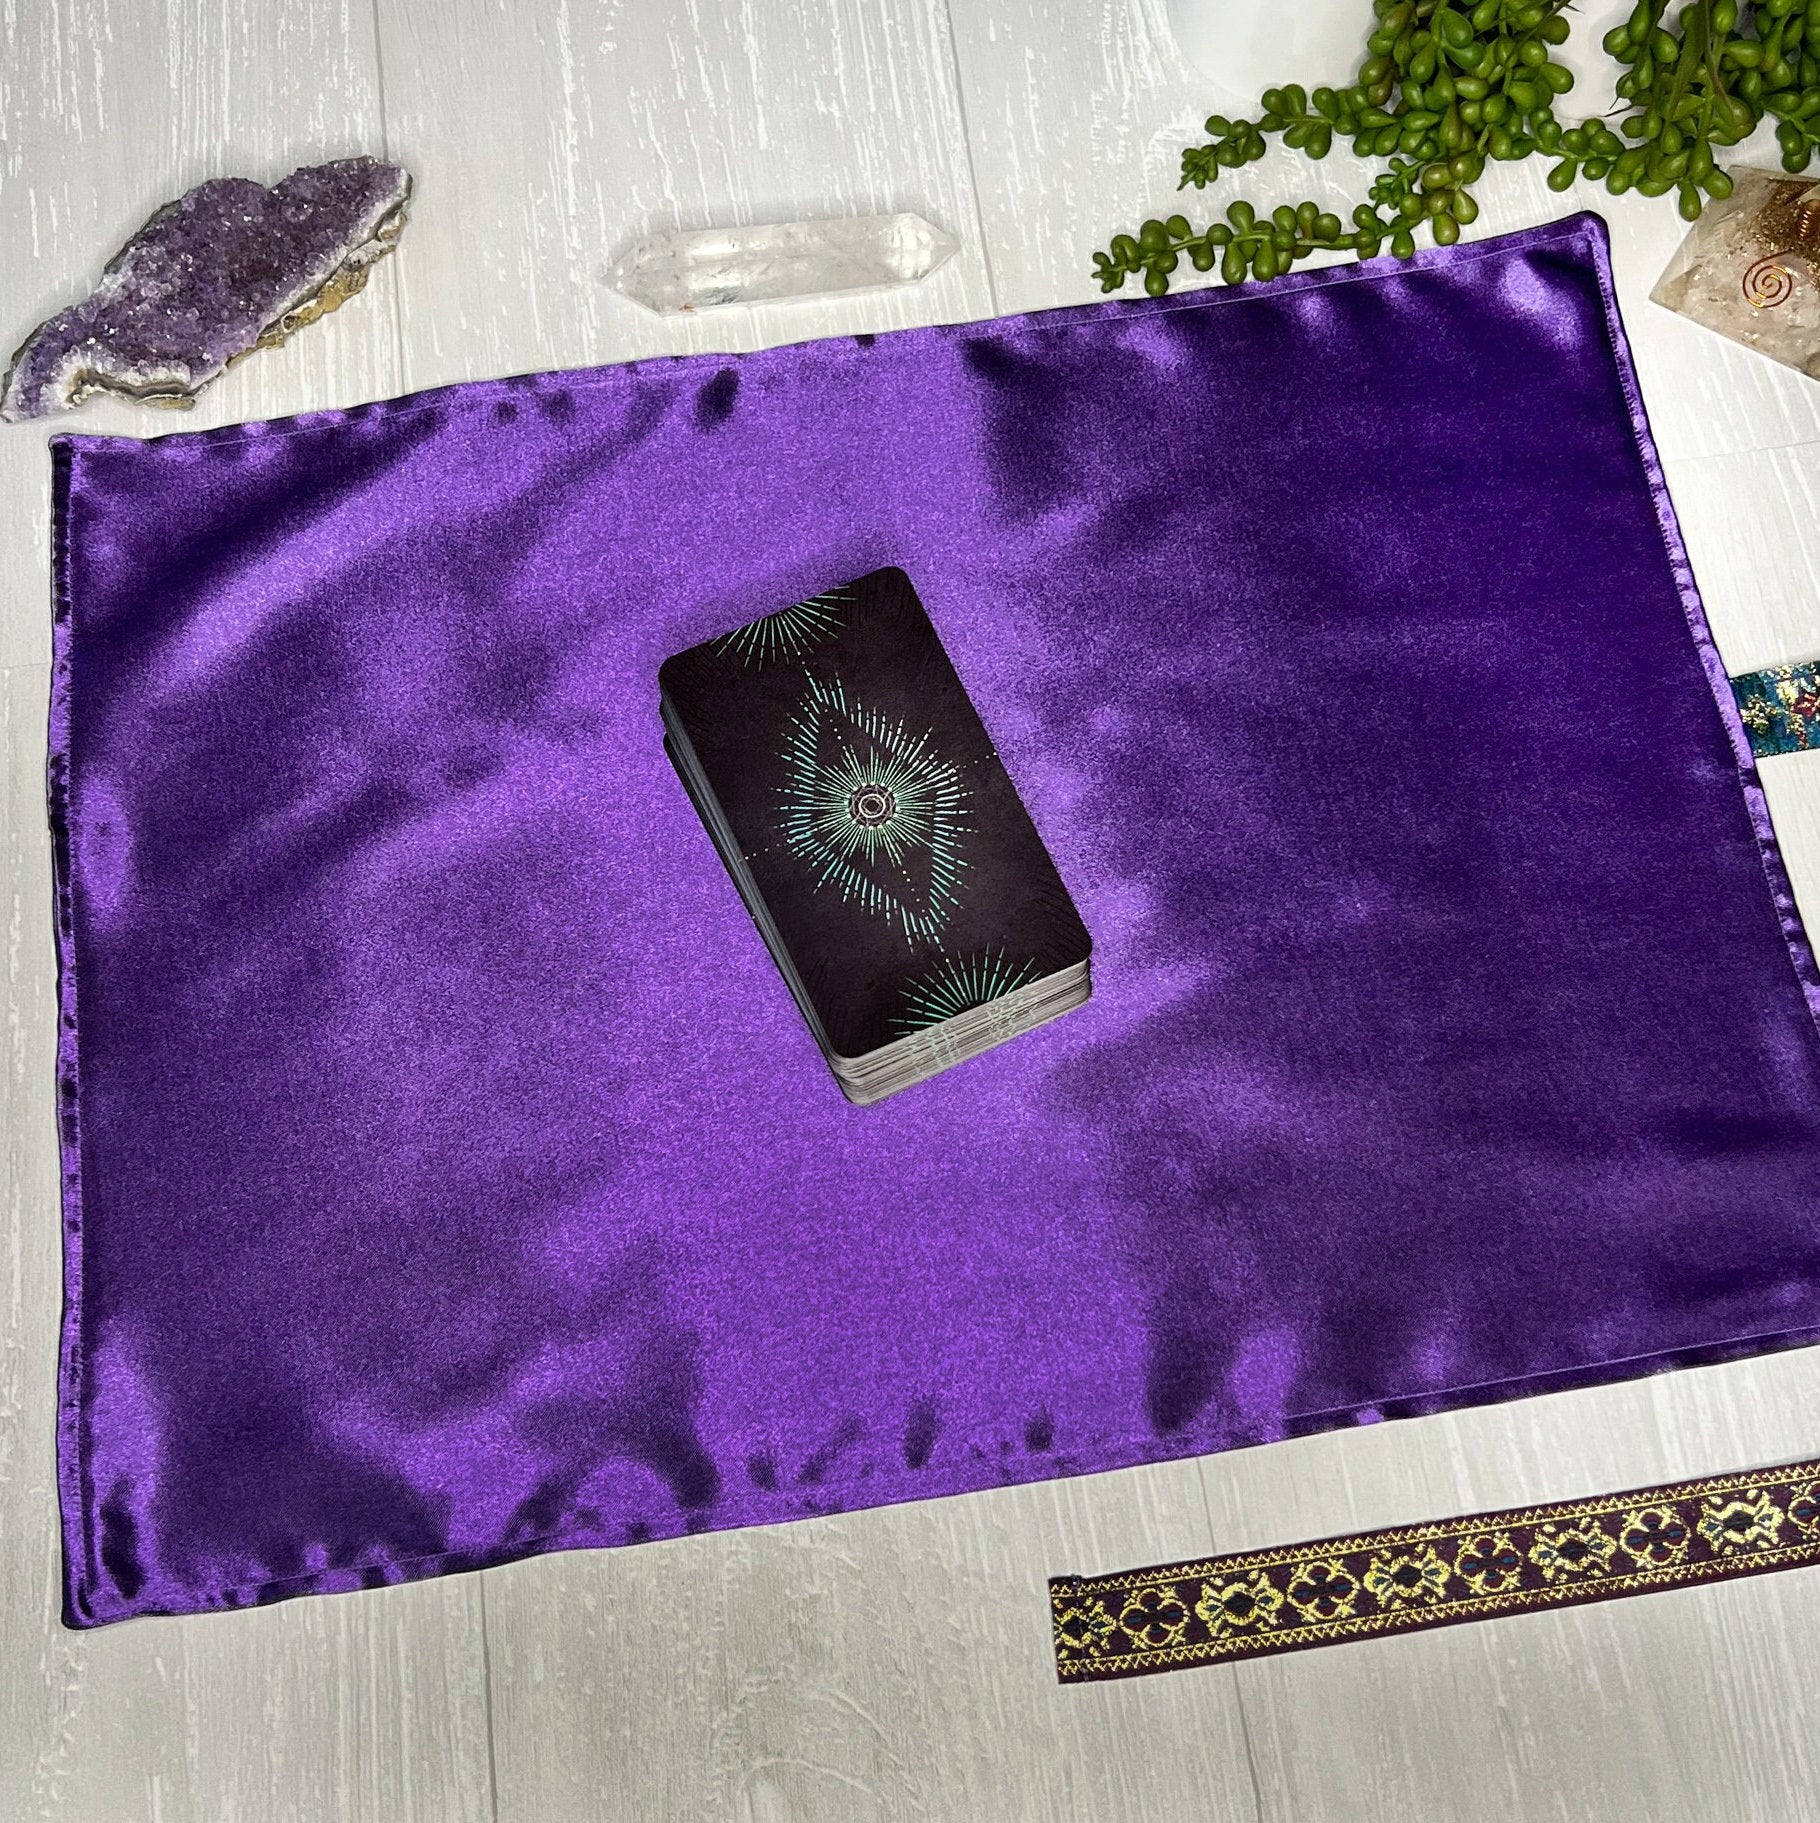 Tarot Wrap, Satin Tarot Storage and Cloth, Tarot Deck Storage Holder, Pagan Witchcraft Wiccan Divination Tools Gifts & Supplies, Purple